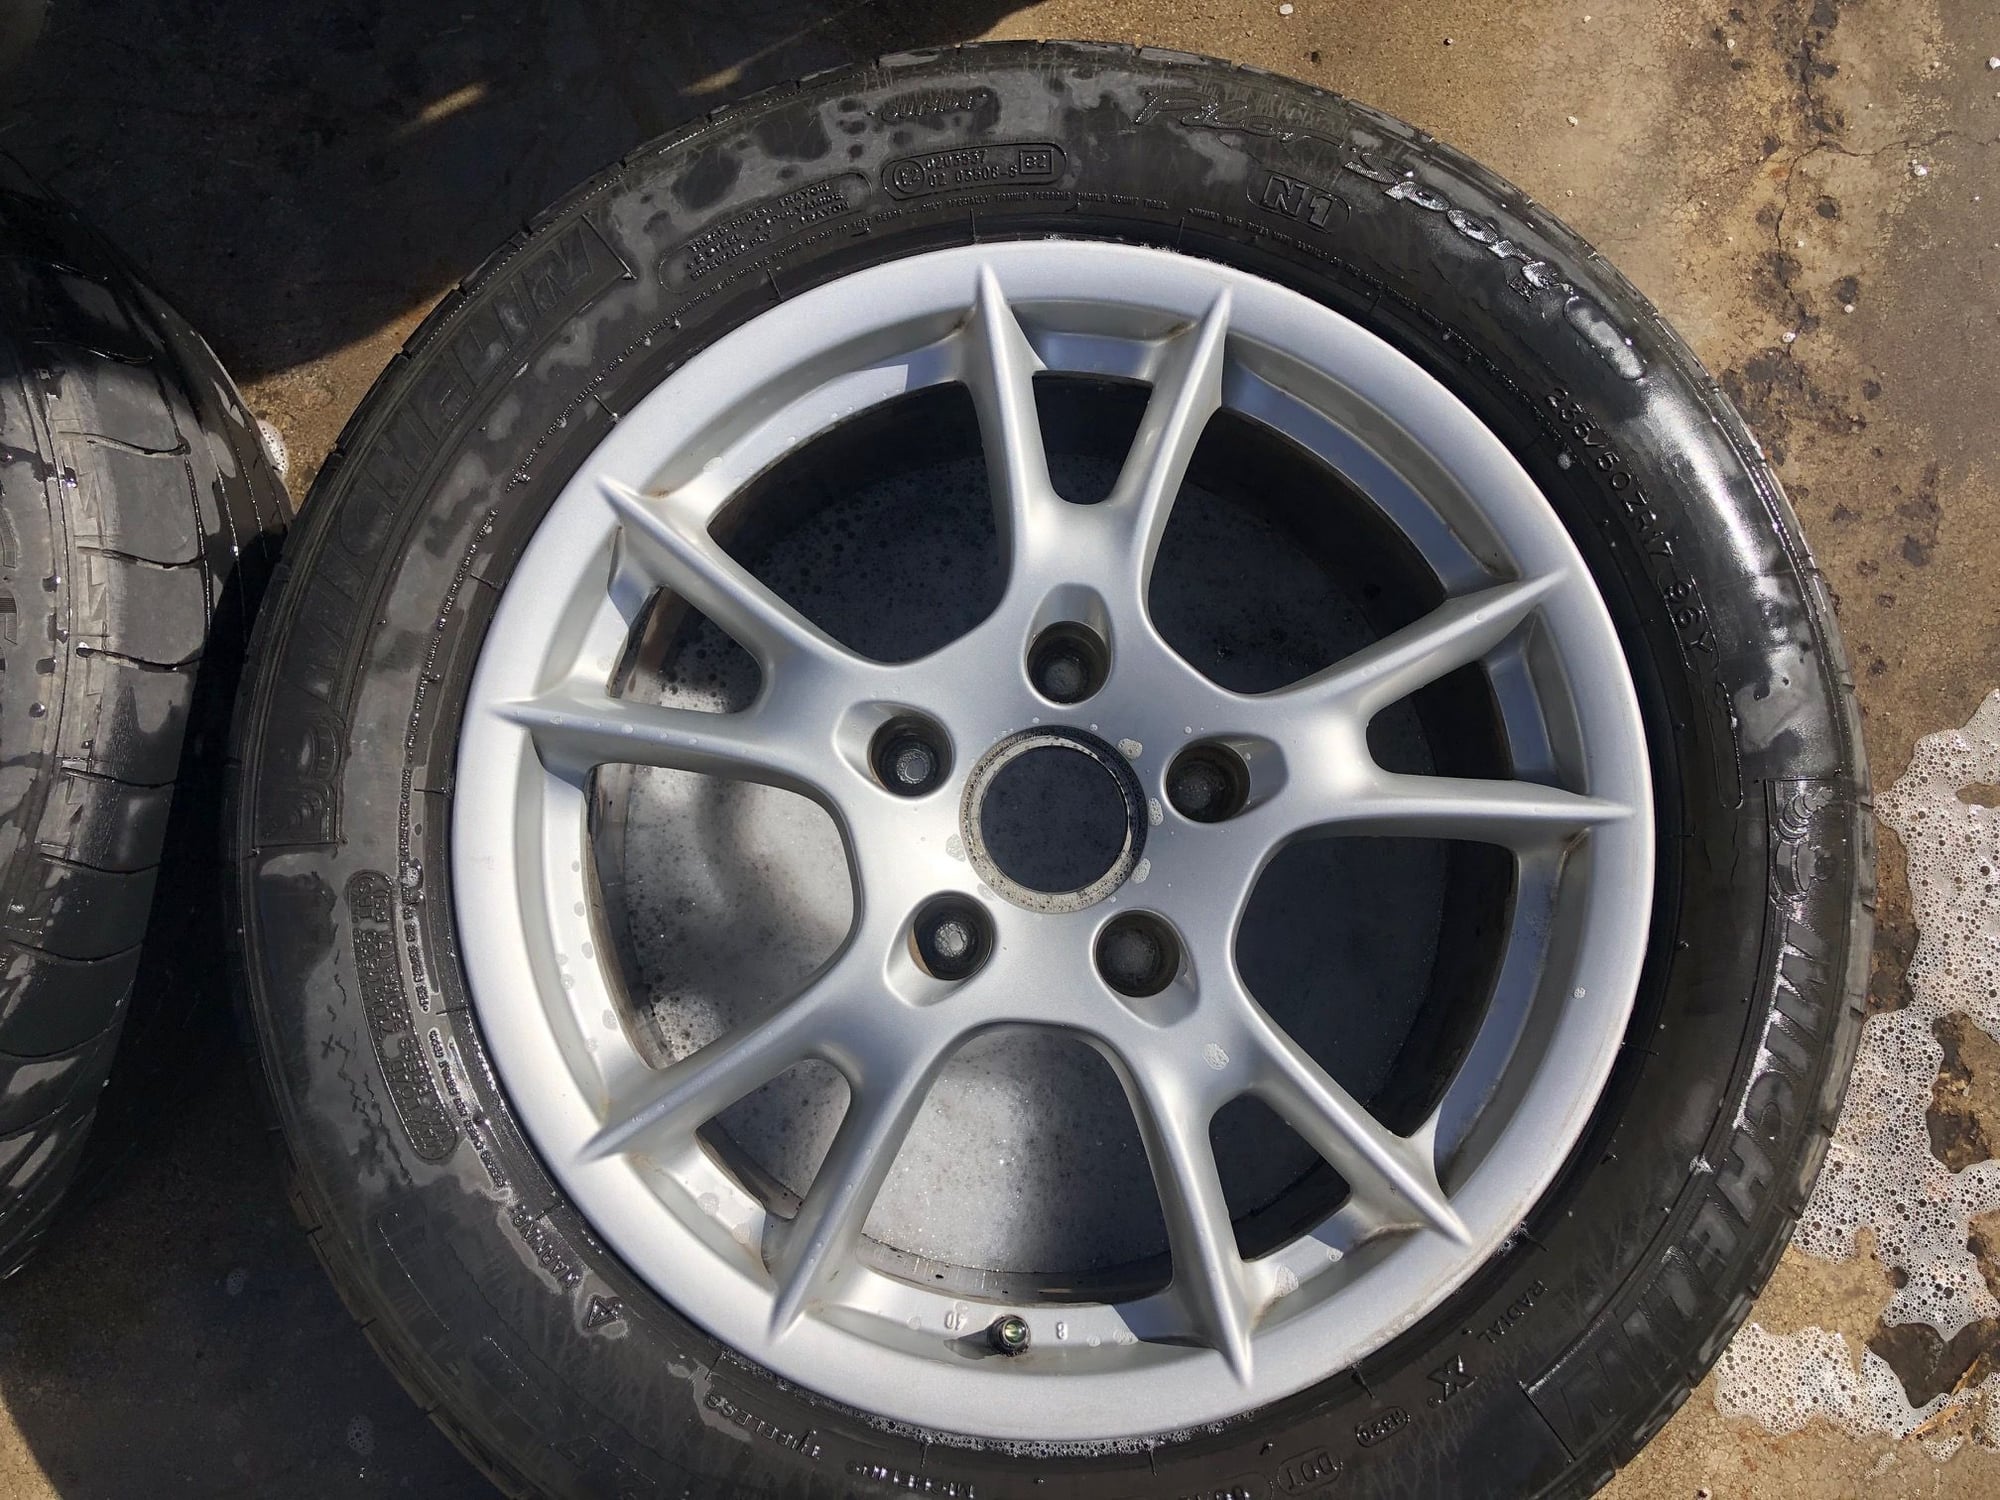 Wheels and Tires/Axles - 987 Boxster Wheels - Used - Denver, CO 80204, United States